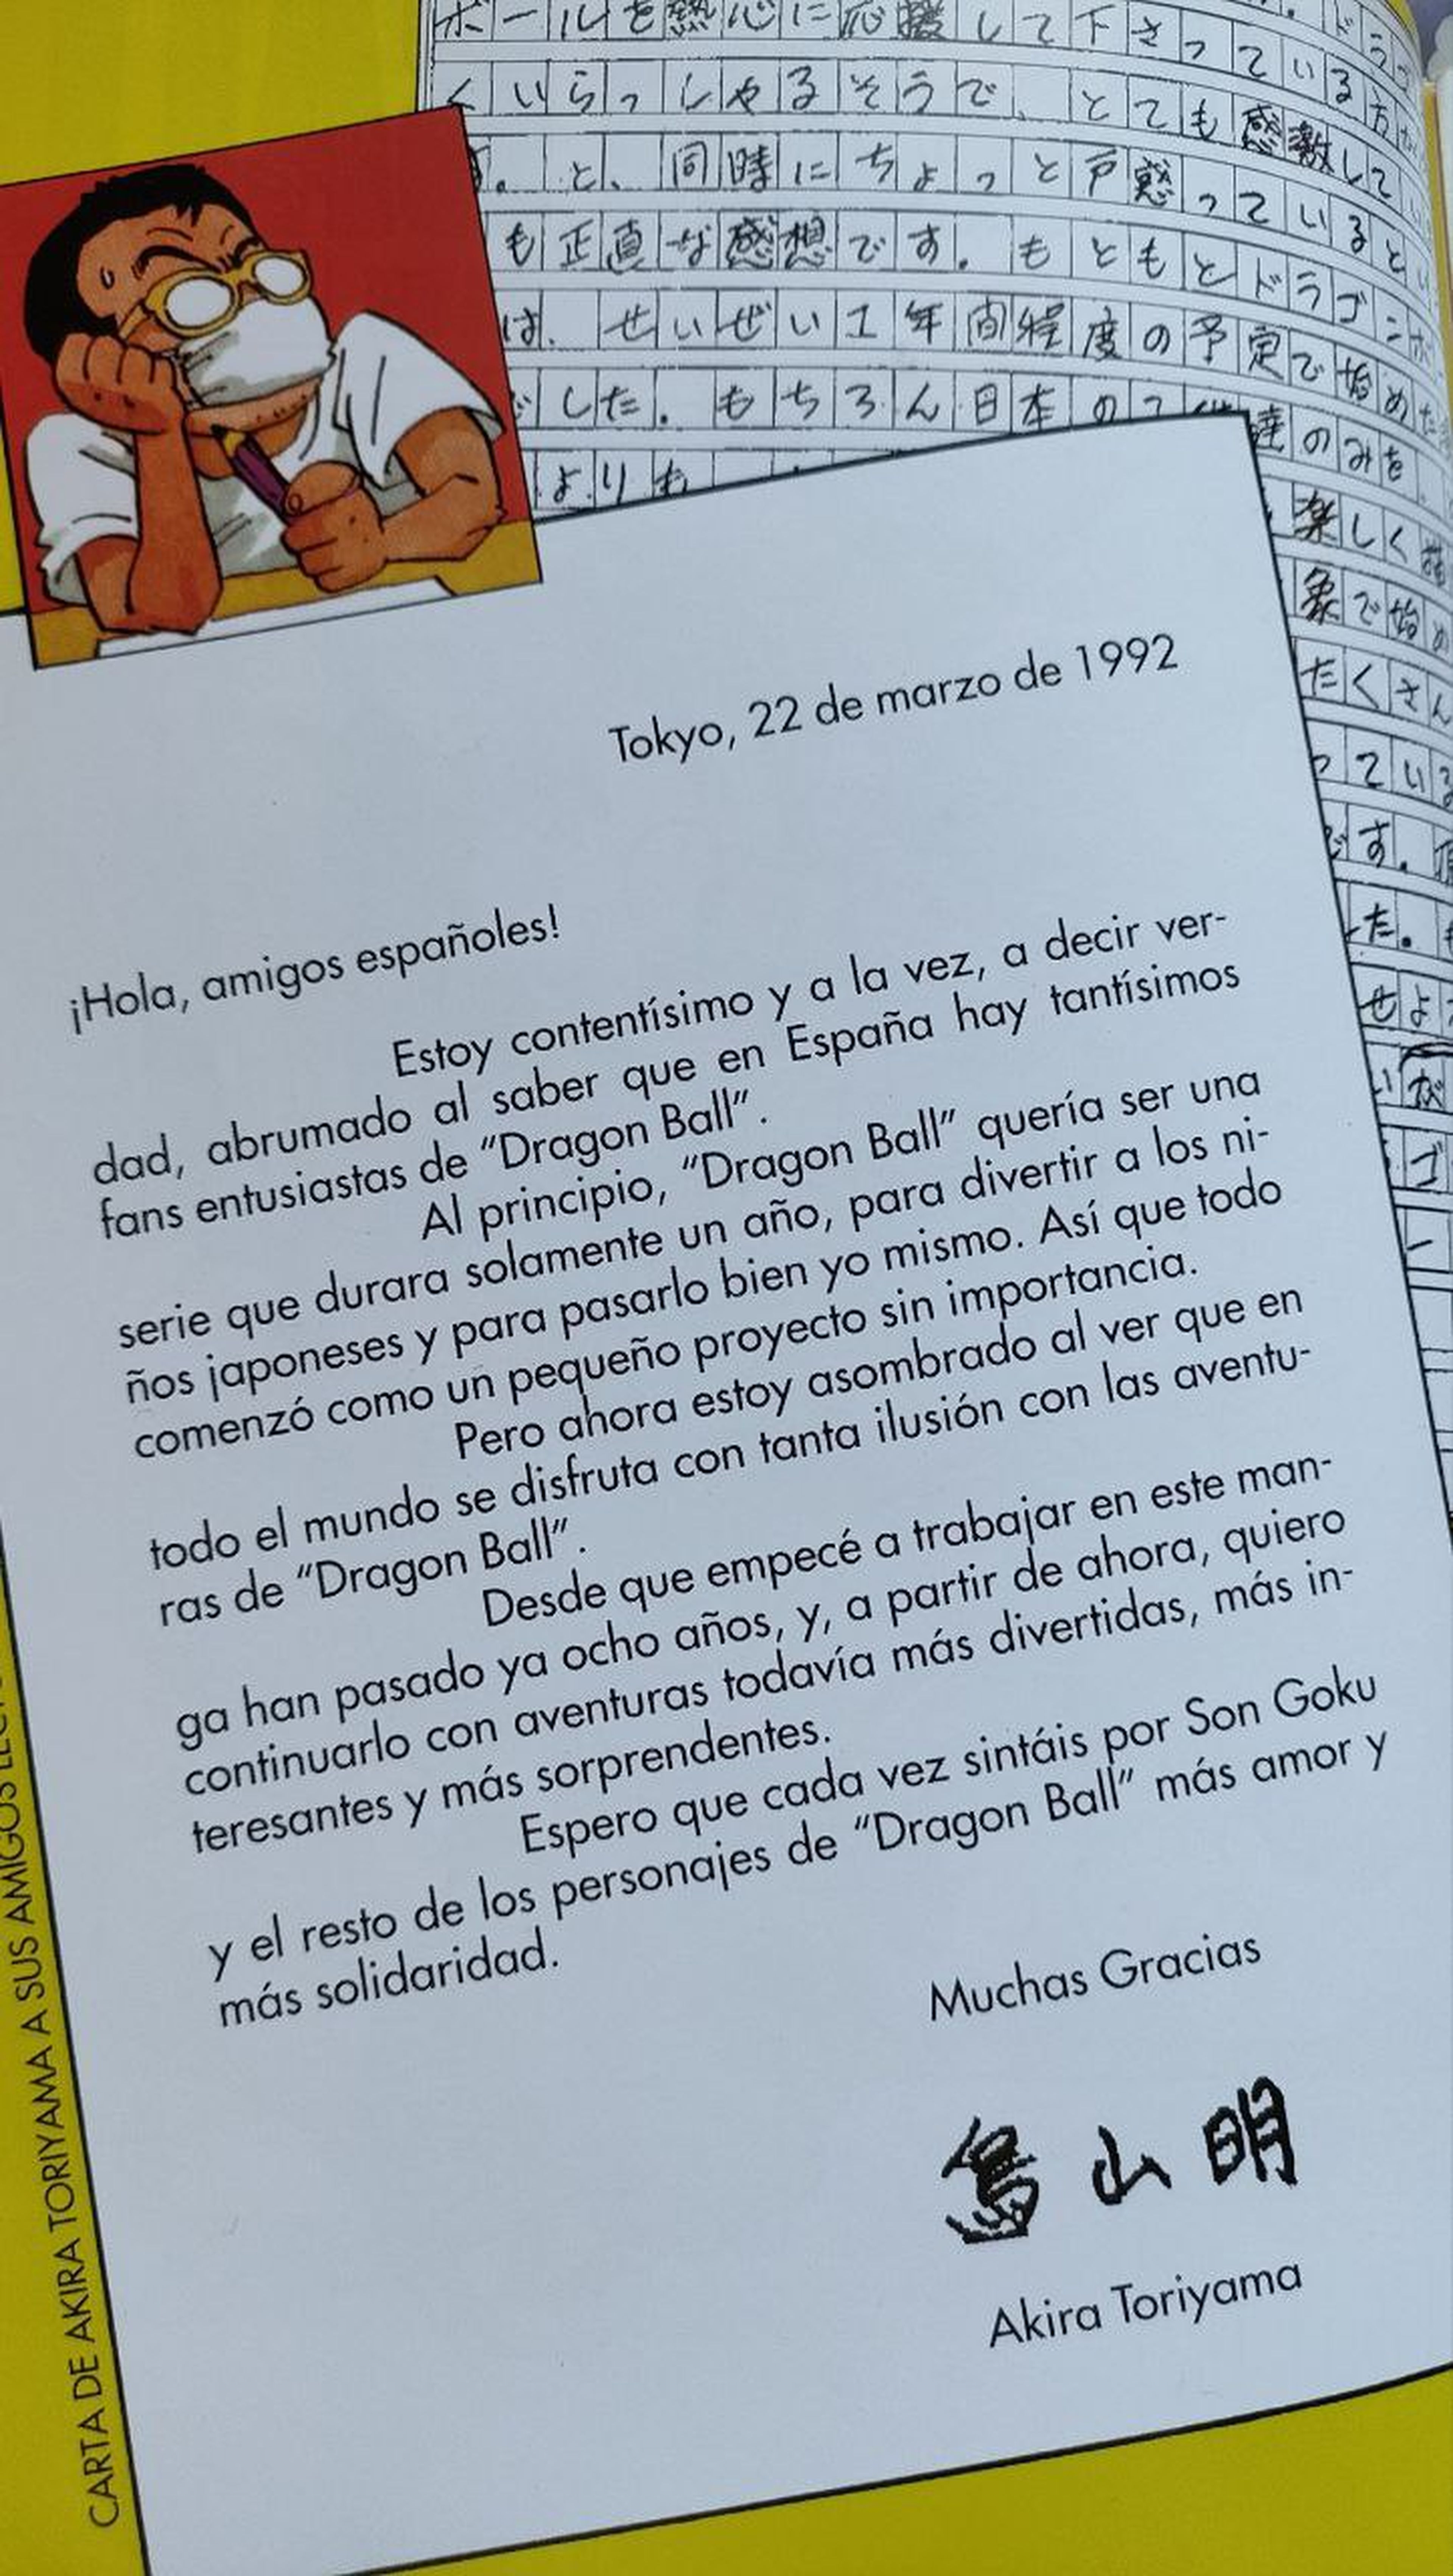 Dragon Ball - The letter that Akira Toriyama wrote and dedicated to the fans from all of Spain